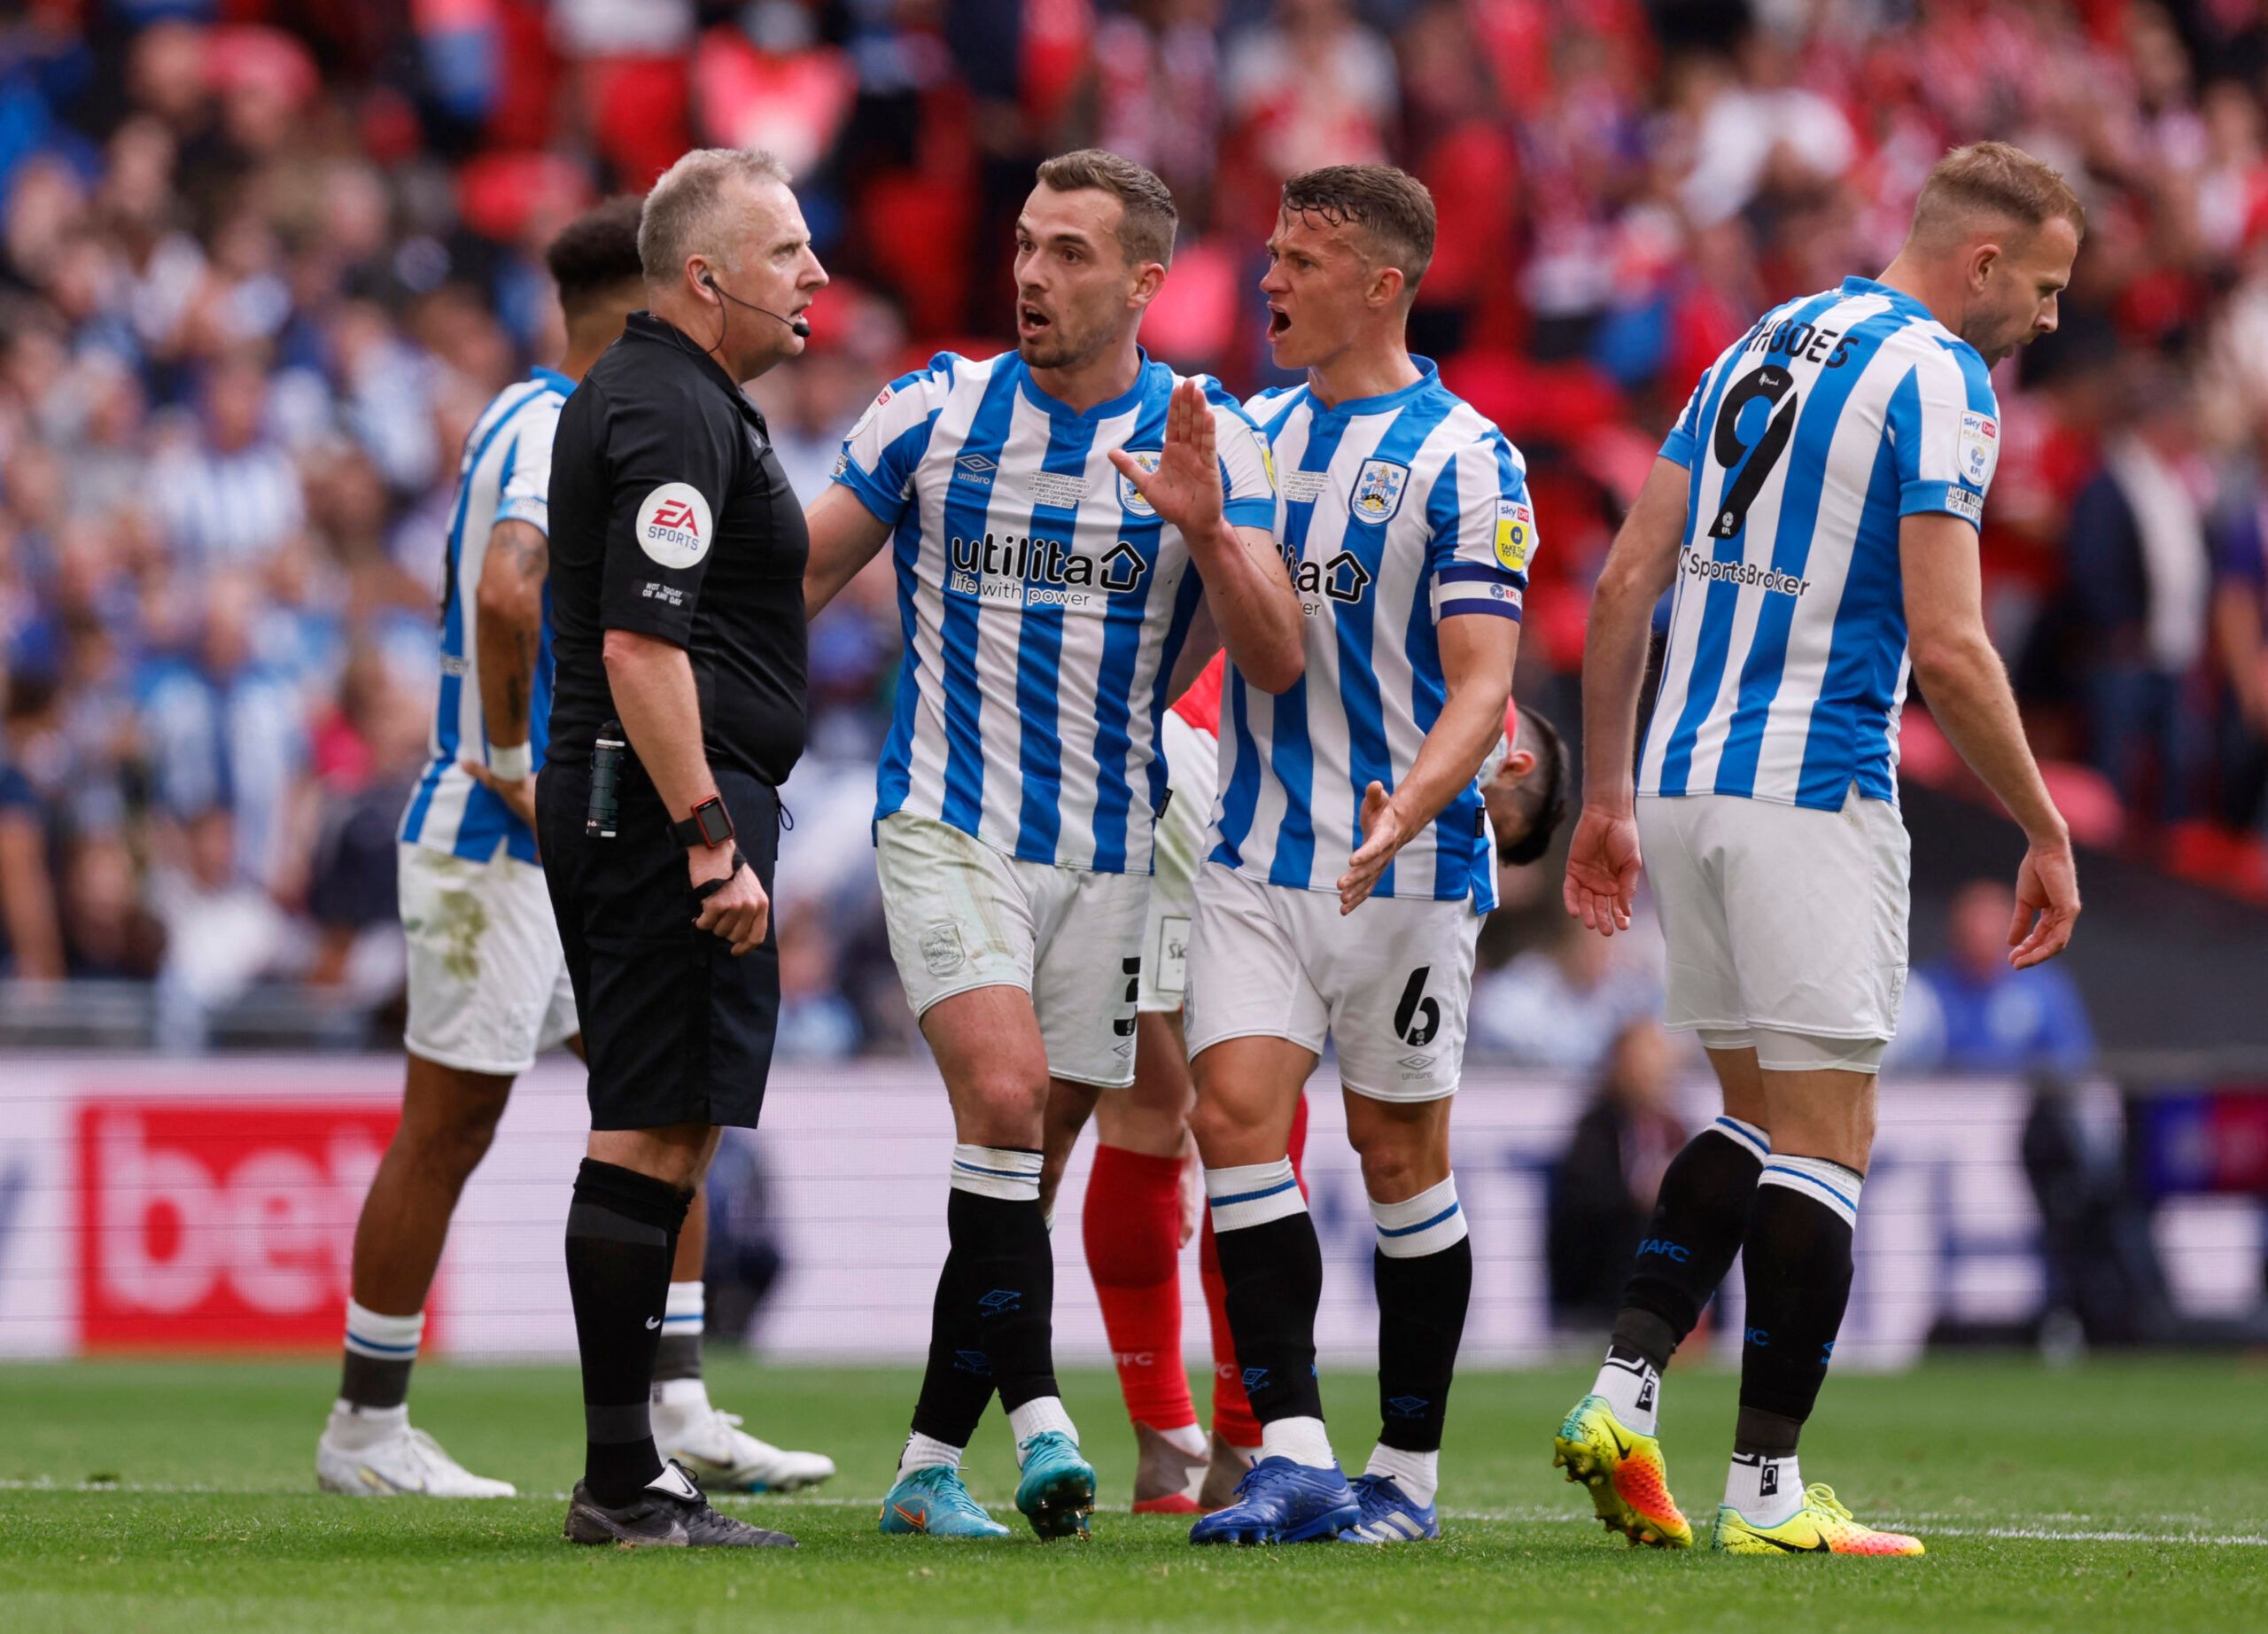 Soccer Football - Championship Play-Off Final - Huddersfield Town v Nottingham Forest - Wembley Stadium, London, Britain - May 29, 2022 Huddersfield Town's Harry Toffolo and Jonathan Hogg remonstrate with referee Jonathan Moss Action Images via Reuters/Andrew Couldridge